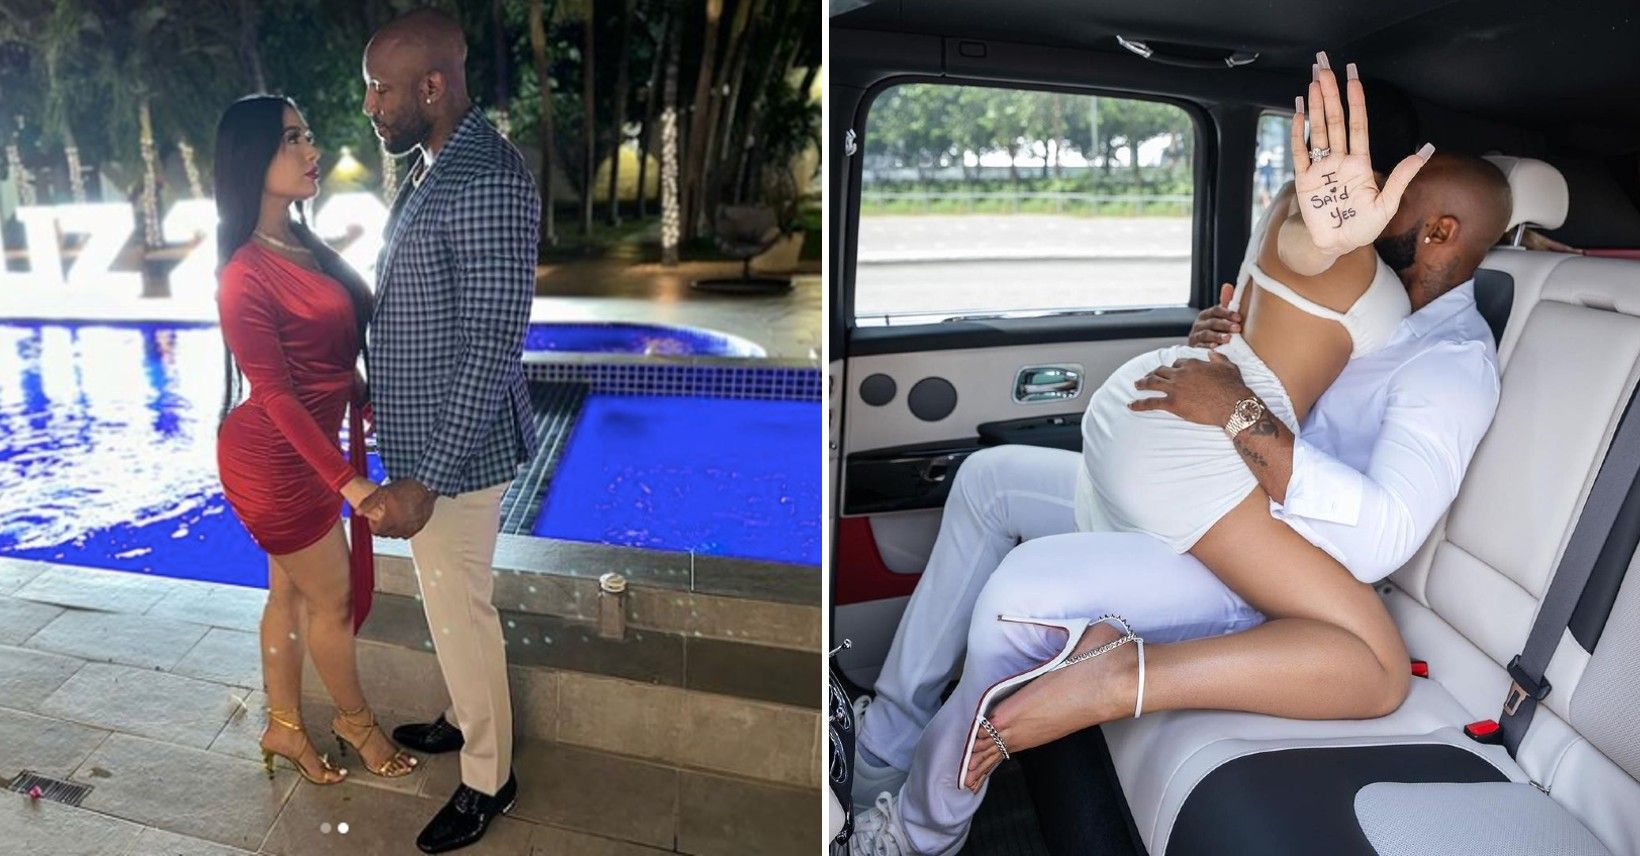 MLB Player Starling Marte is Engaged—See His Fiancée's Impressive